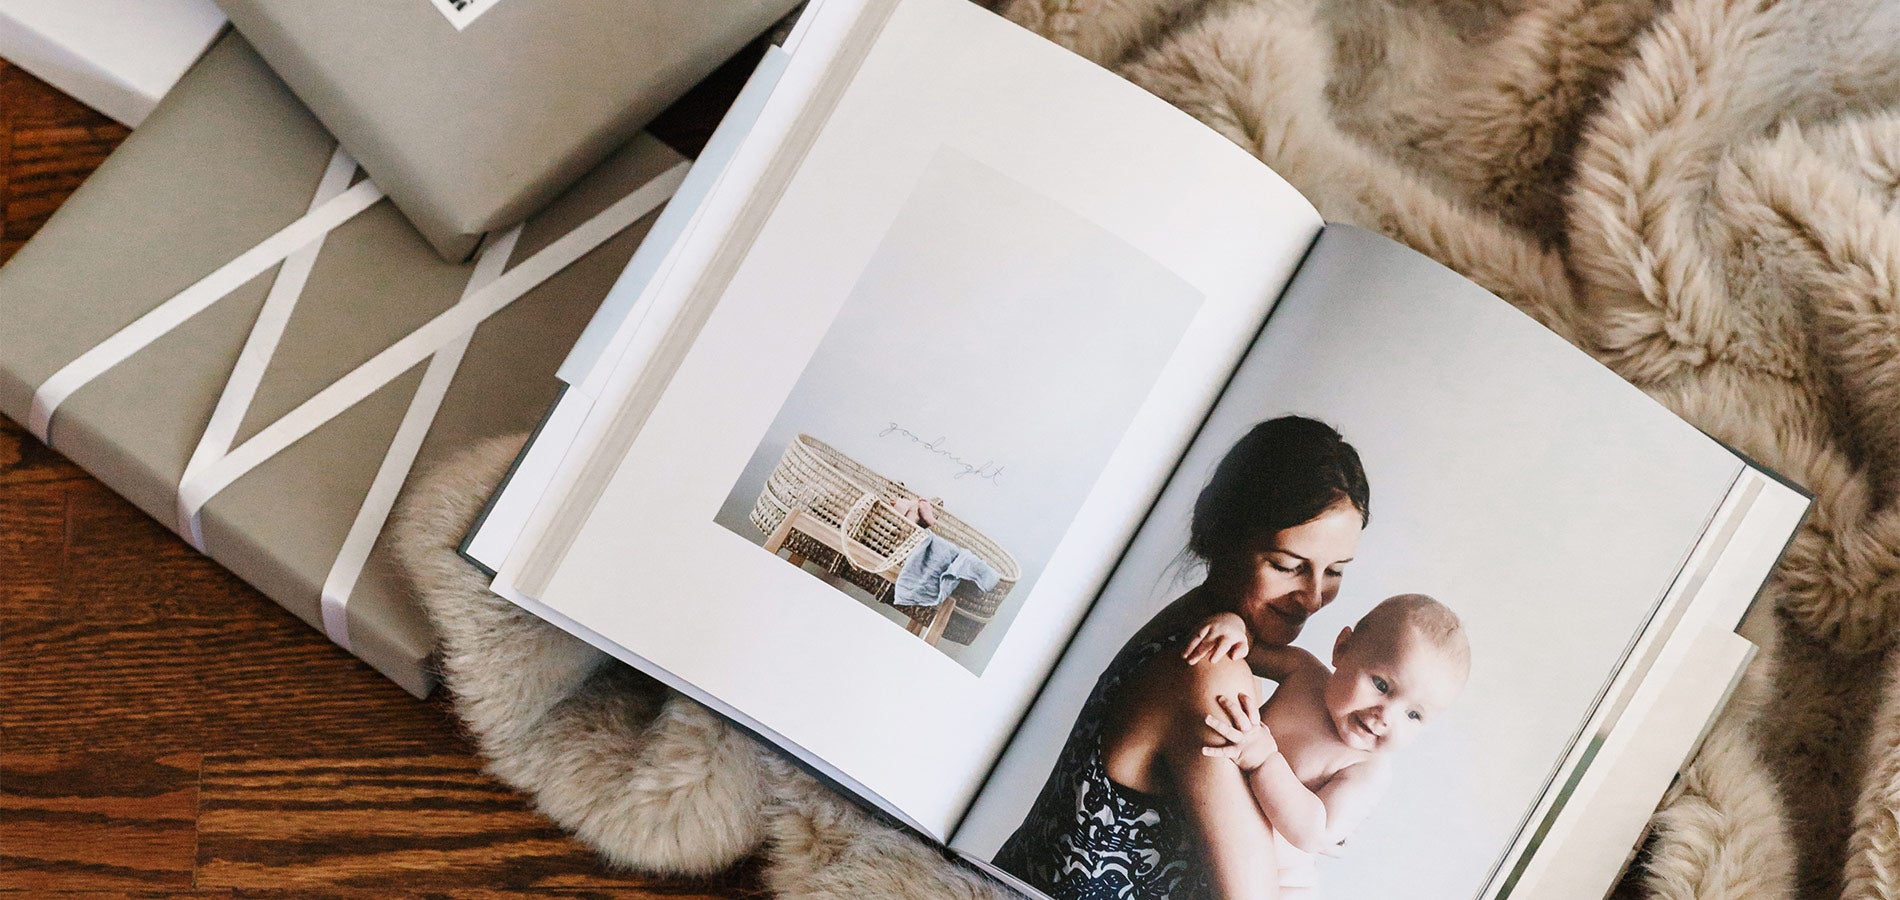 gift boxes next to photo book featuring full page image of mother and baby